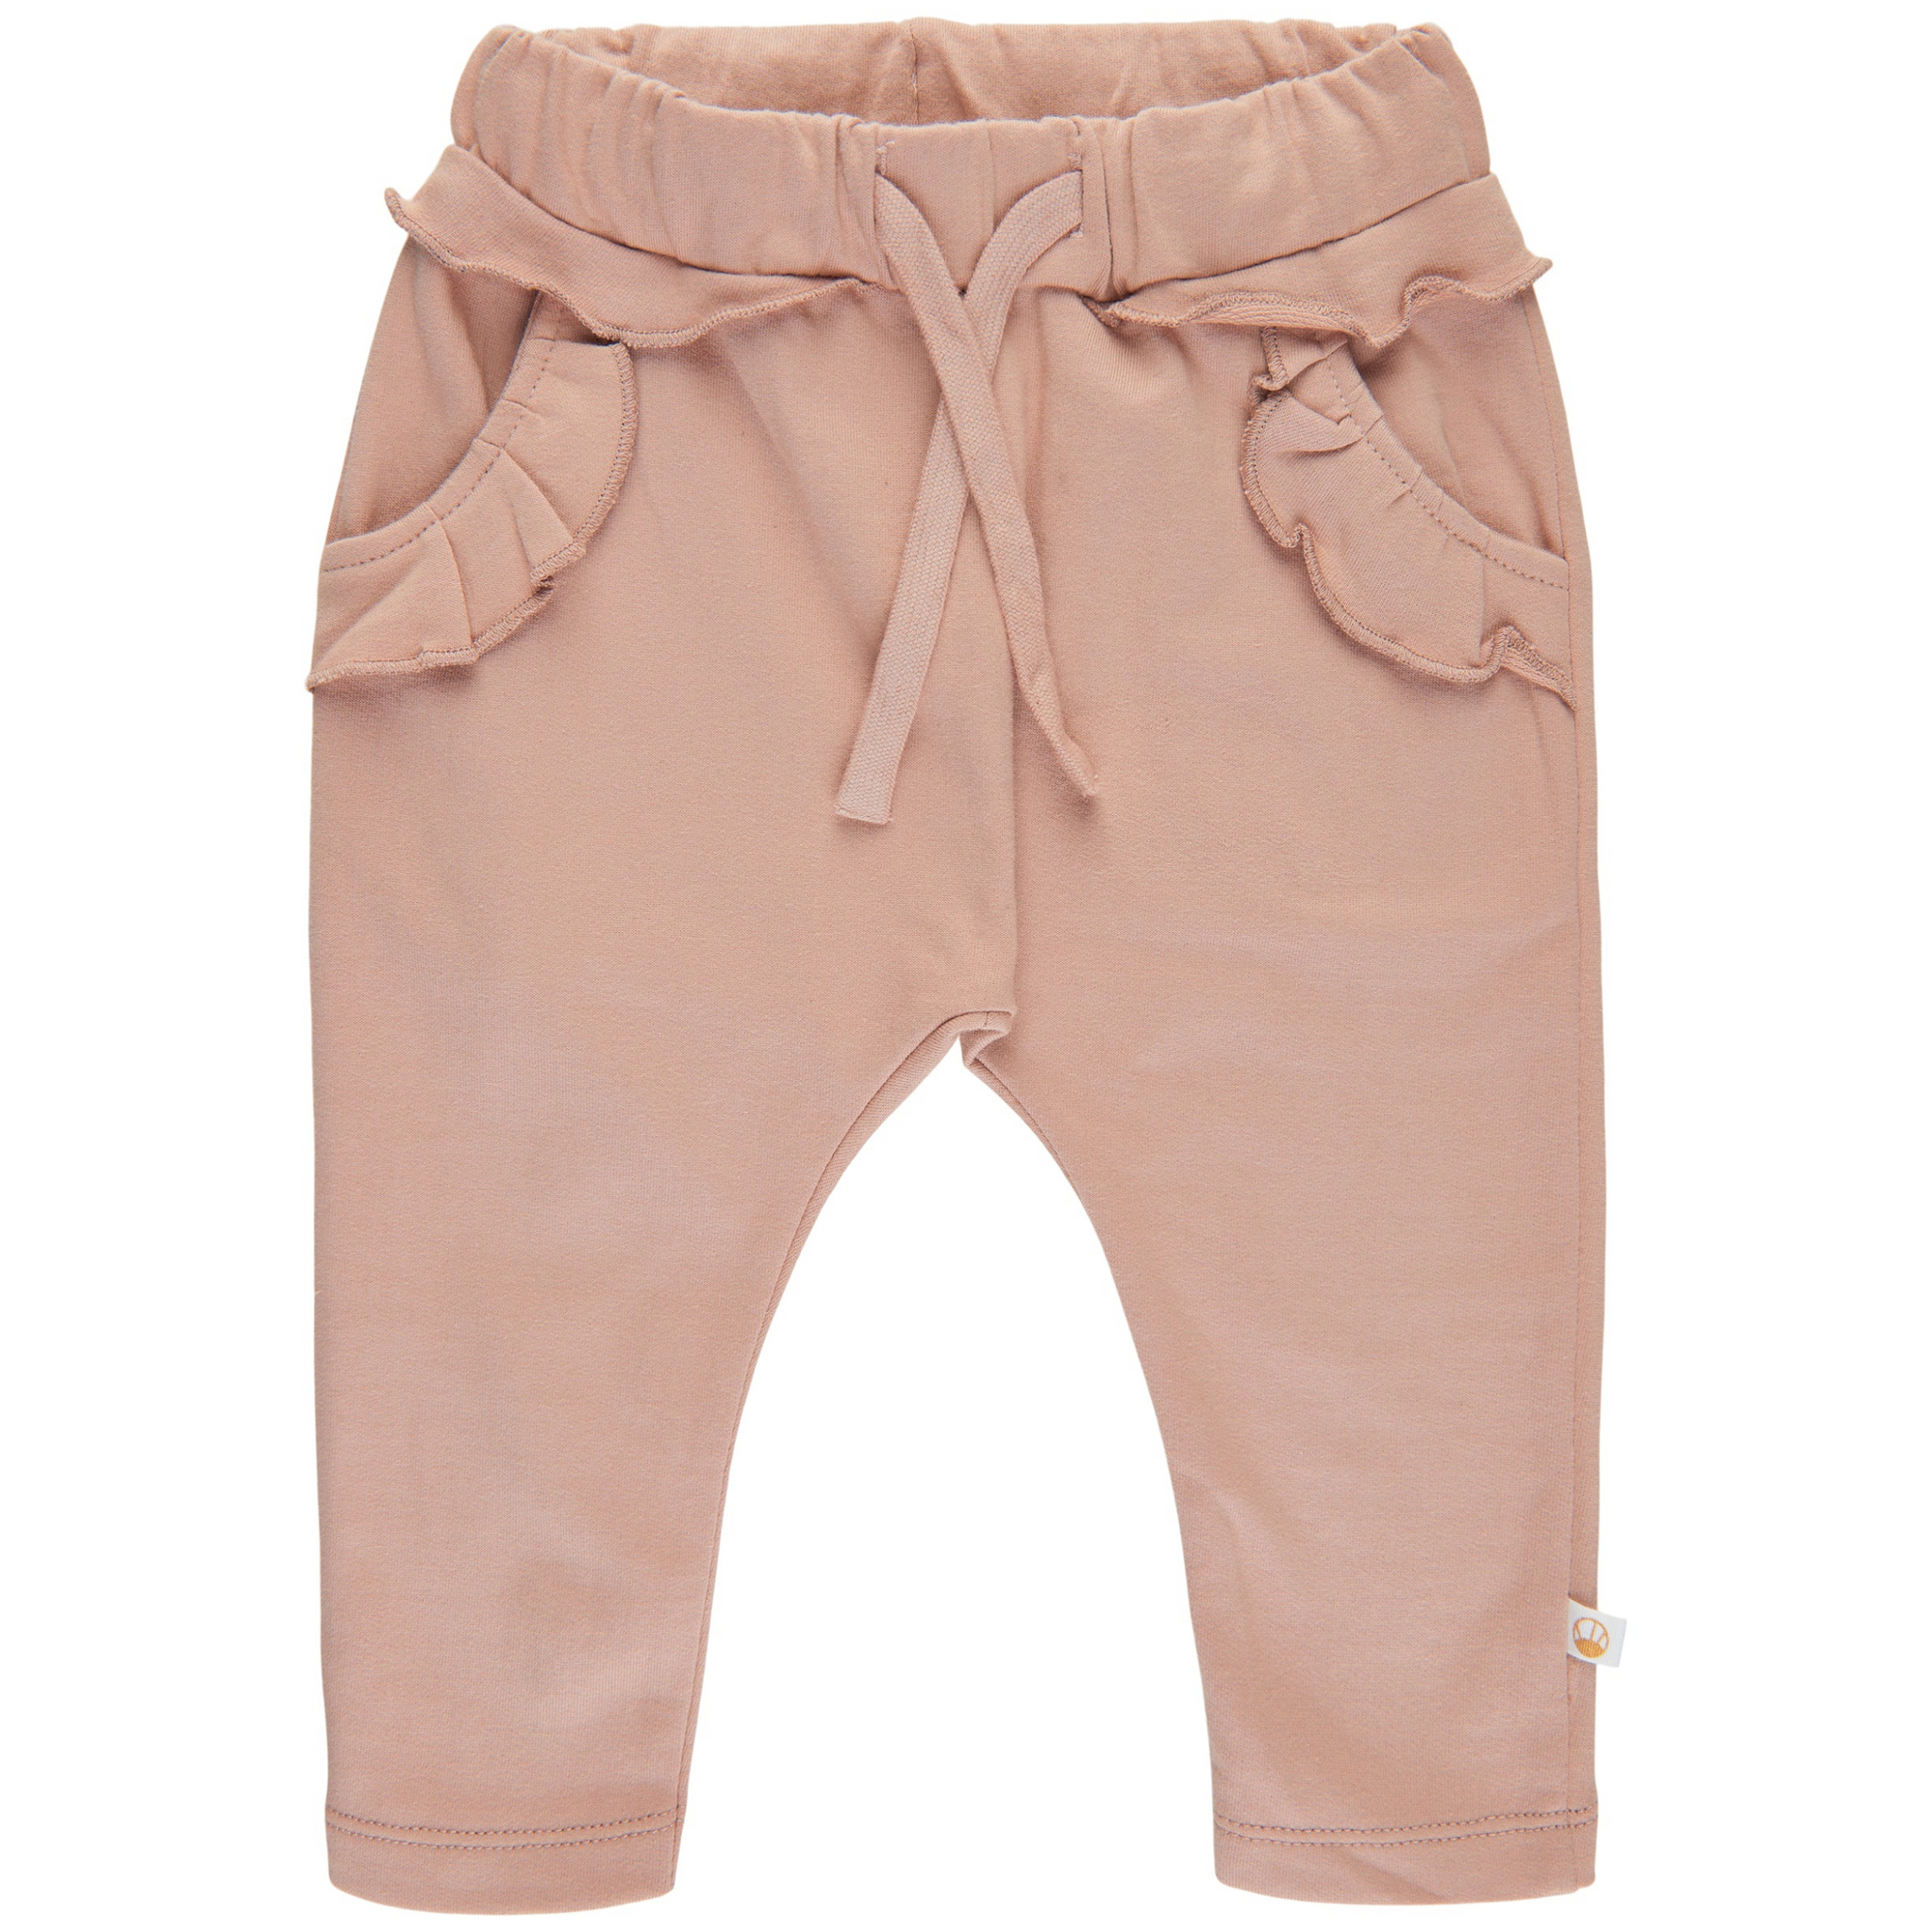 THE NEW Siblings - Delores Sweatpants (TNS1432) - Rose Dust